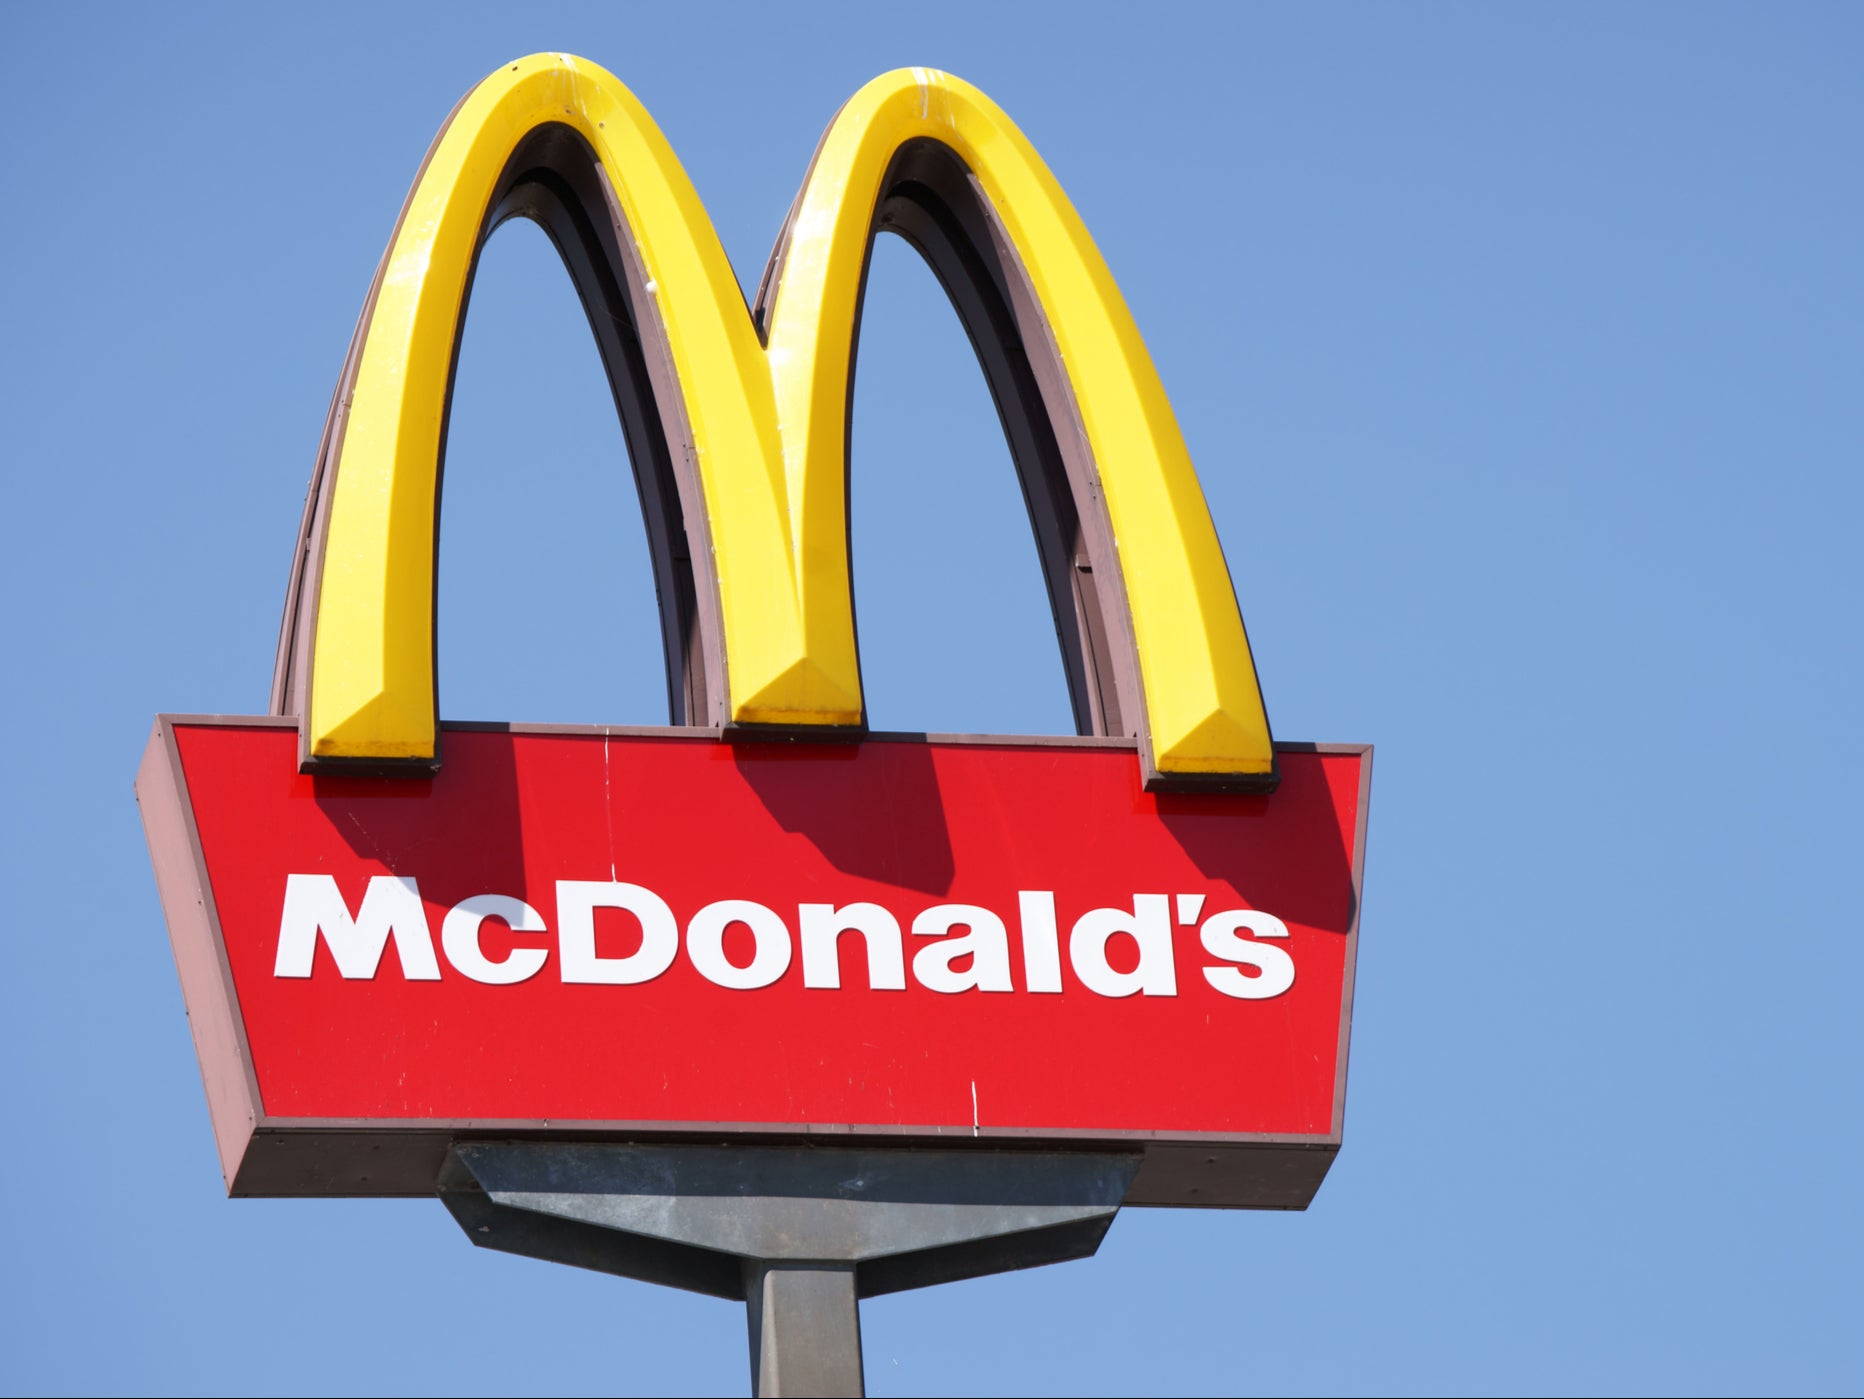 McDonald’s is coming under mounting pressure over its refusal to pull operations out of Russia